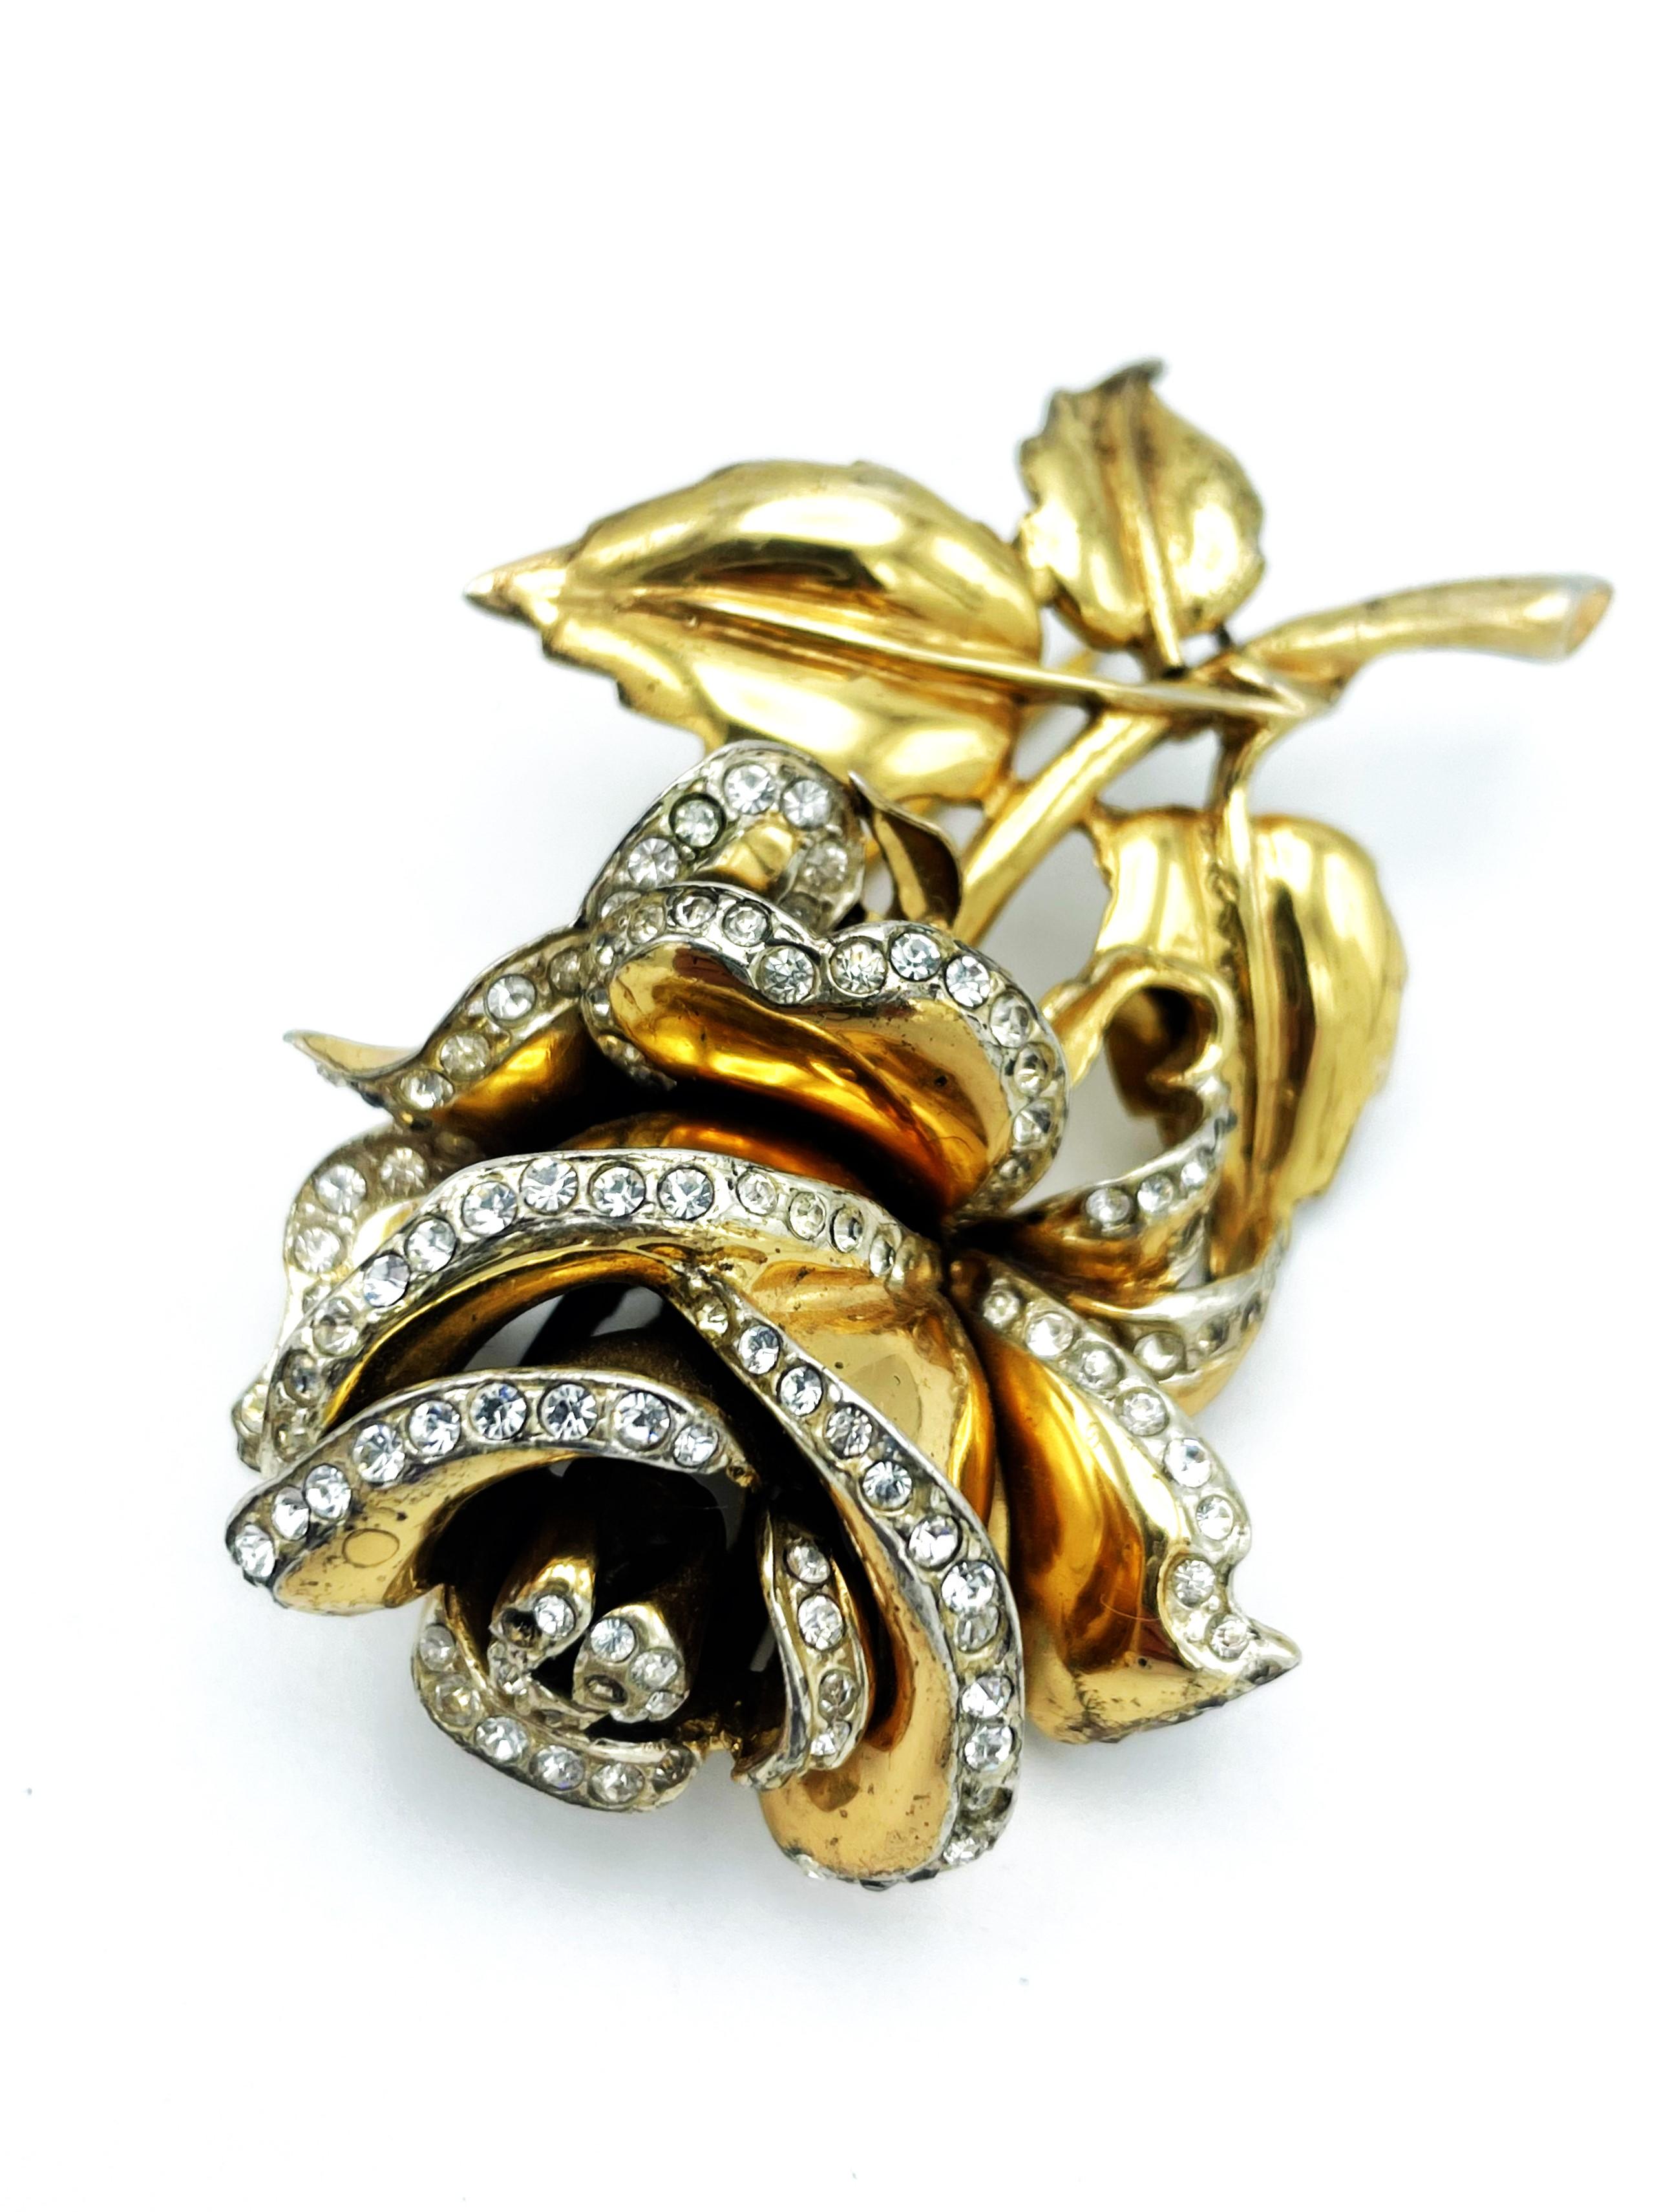 BLOSSOMING!
The brooch celebretes its comeback and lets your outfits shine!

A fully bloomed rose with small rhinestones on each petal. 
Measureme:  Hight 6 cm Wide 4, Deep 2 cm, 
Features
- Signed 'Coro Craft Sterling' 
- Sterling gold plated 
-